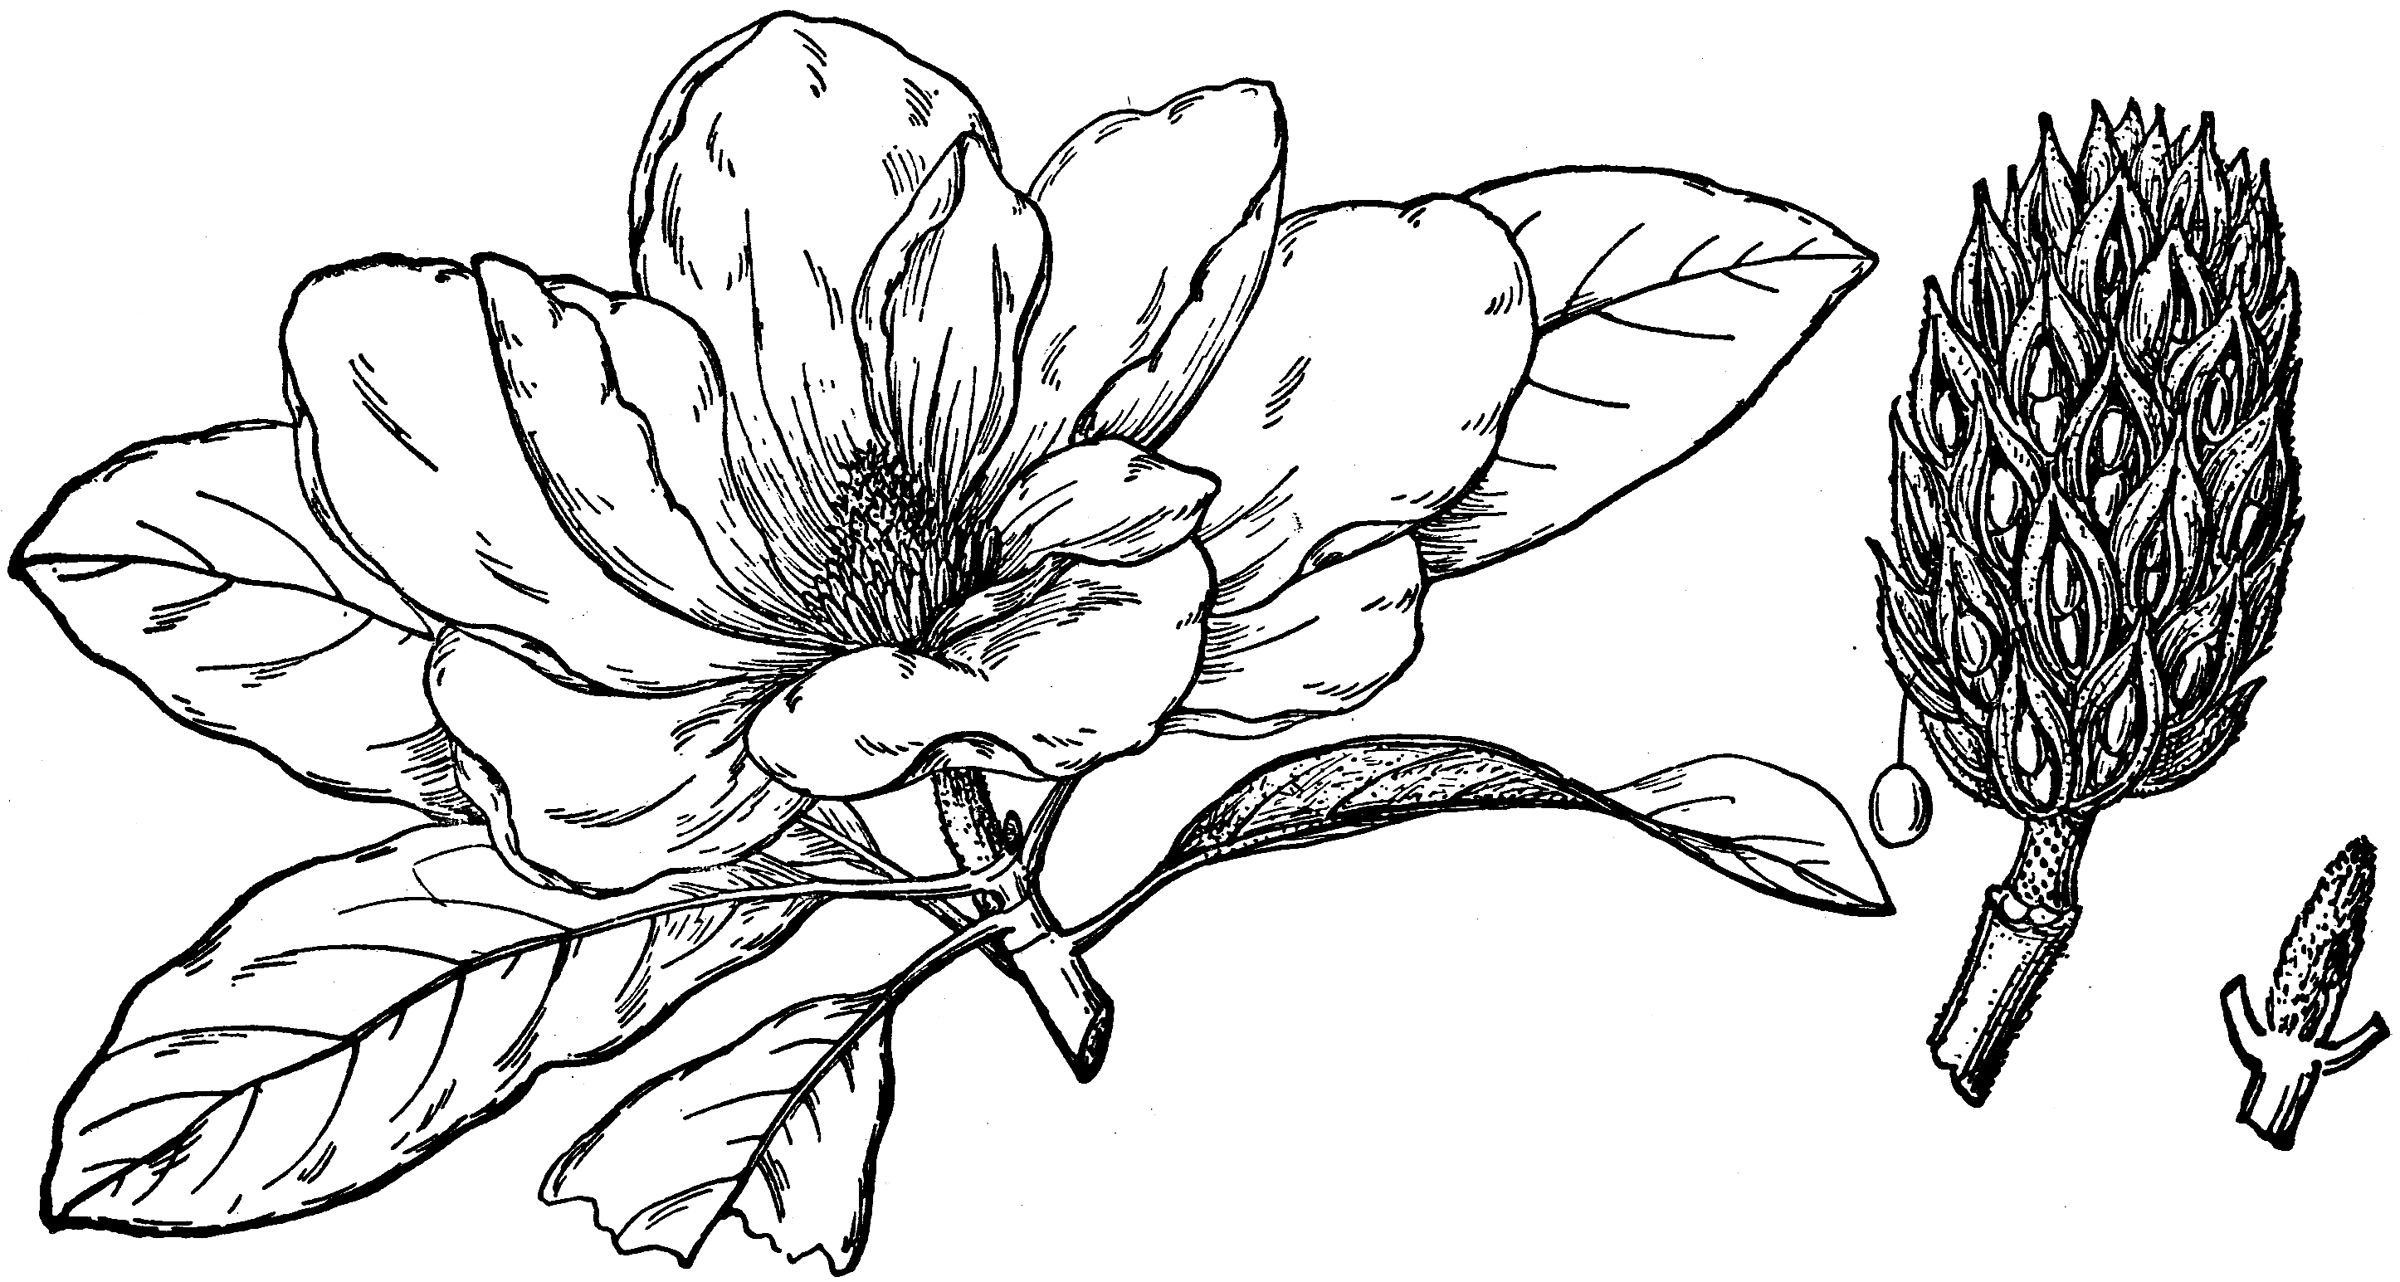 Flower of Southern Magnolia | ClipArt ETC